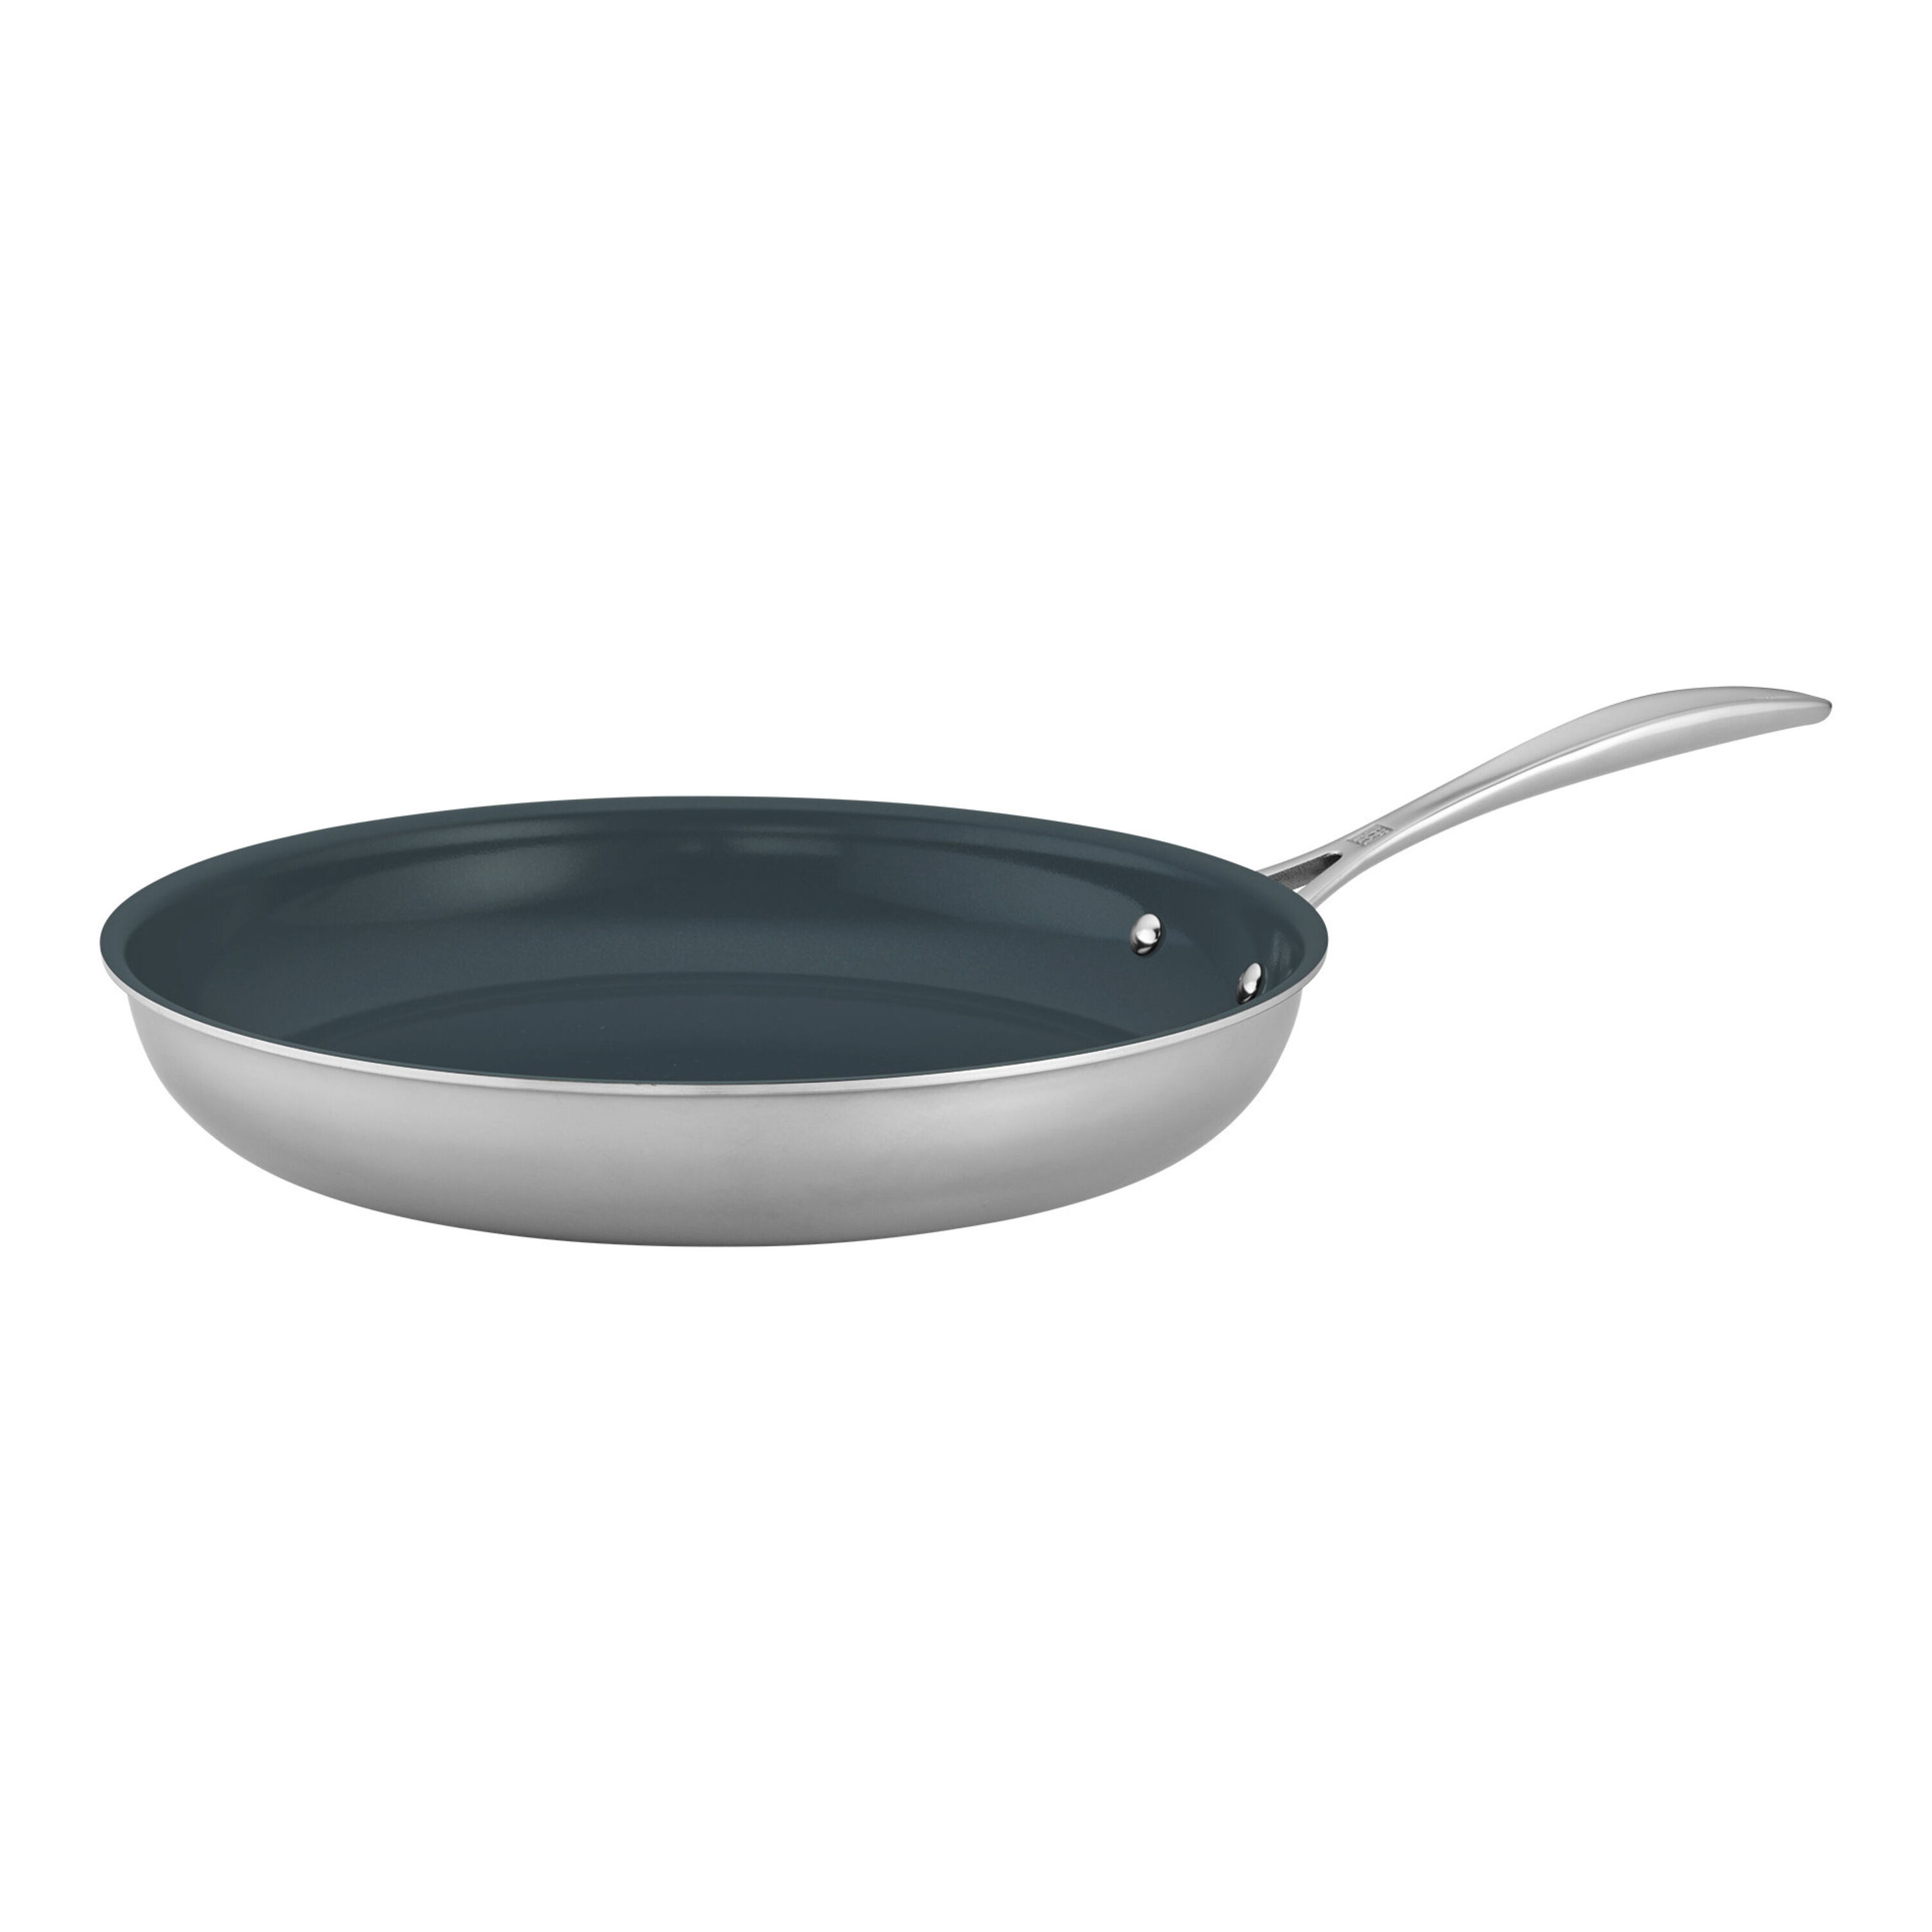 ZWILLING Clad CFX 12-inch, Ceramic, Non-stick, Stainless Steel Fry Pan